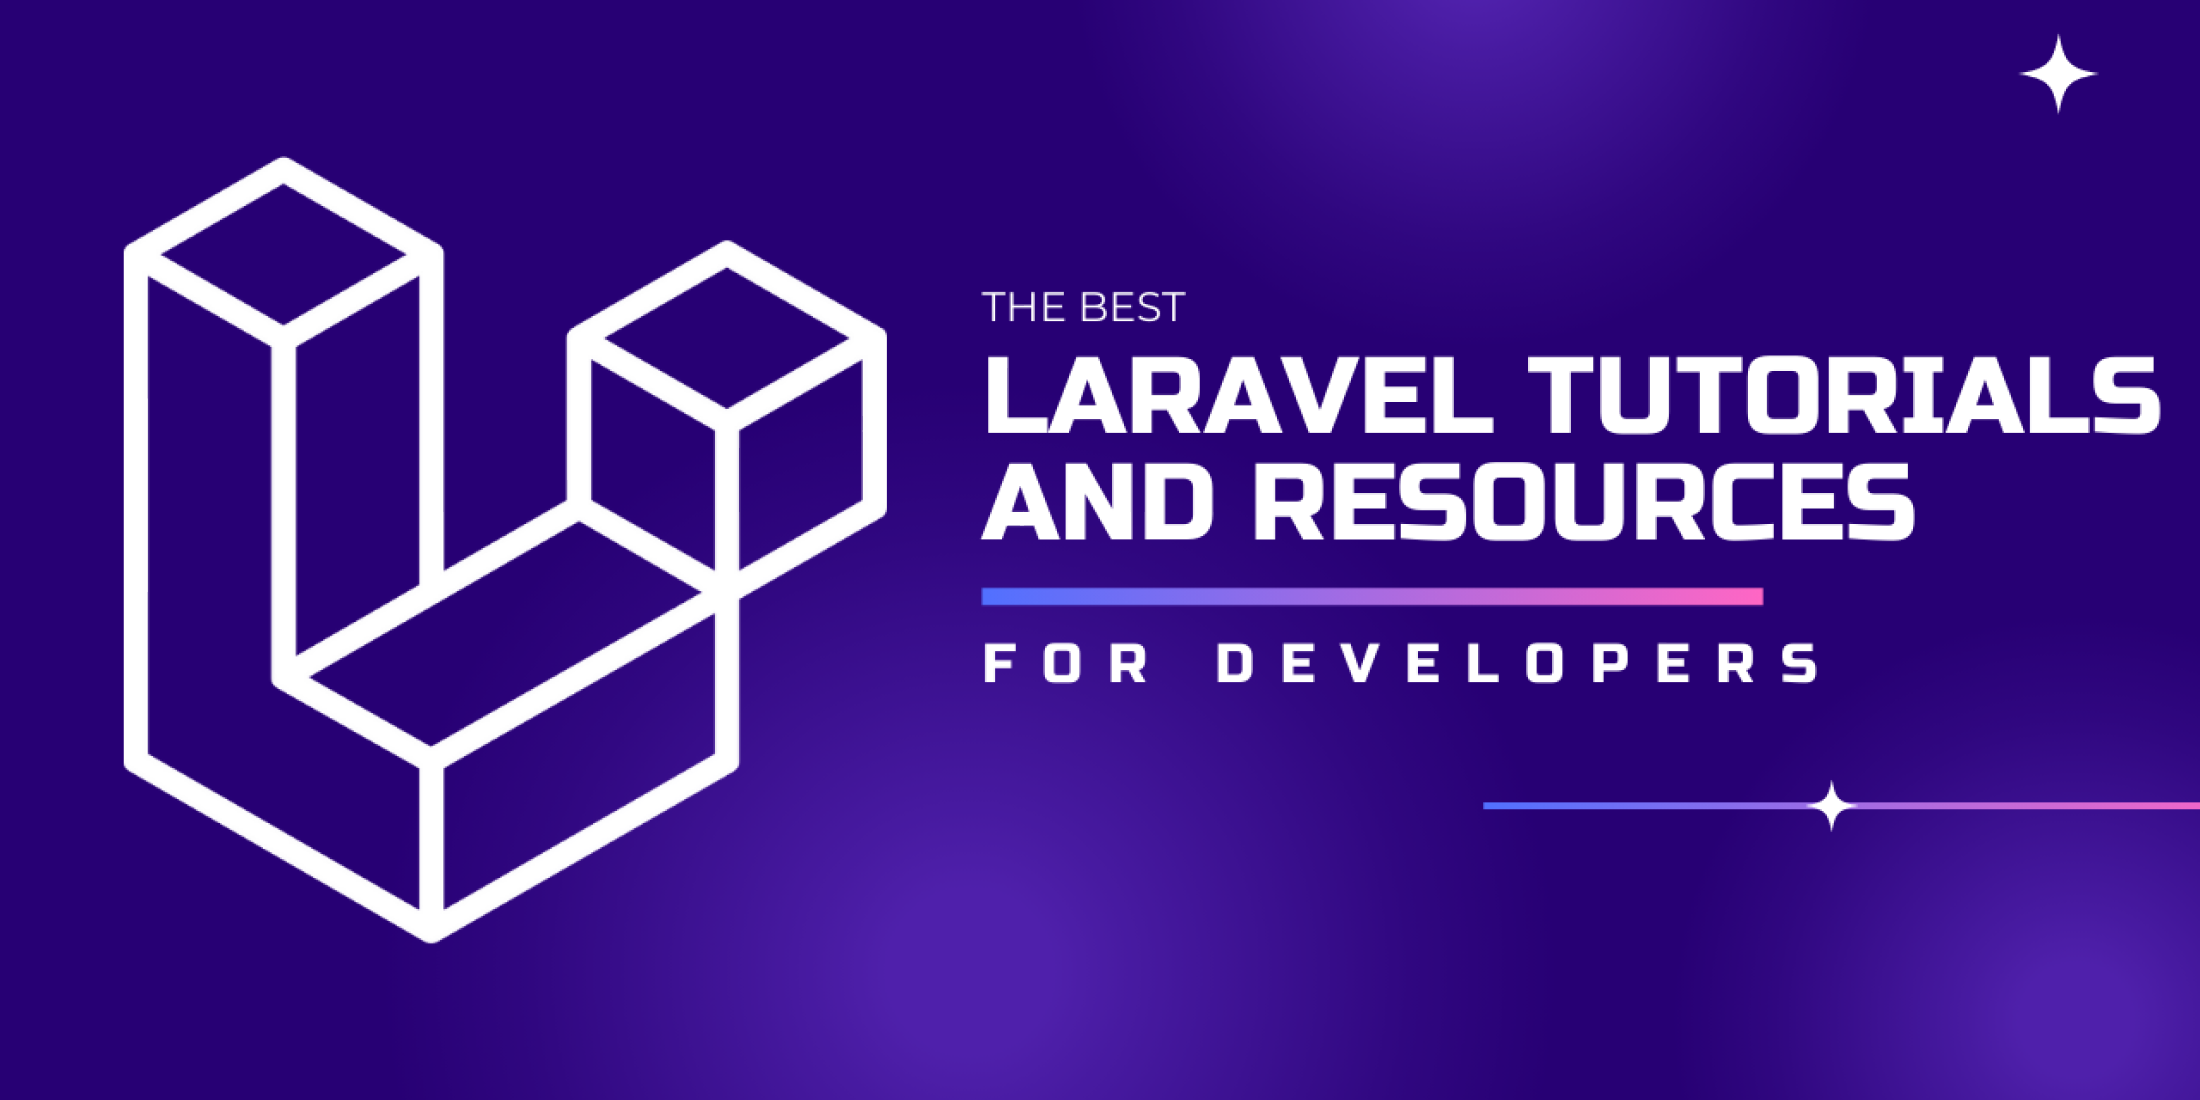 The Best Laravel Tutorials and Resources for Developers image